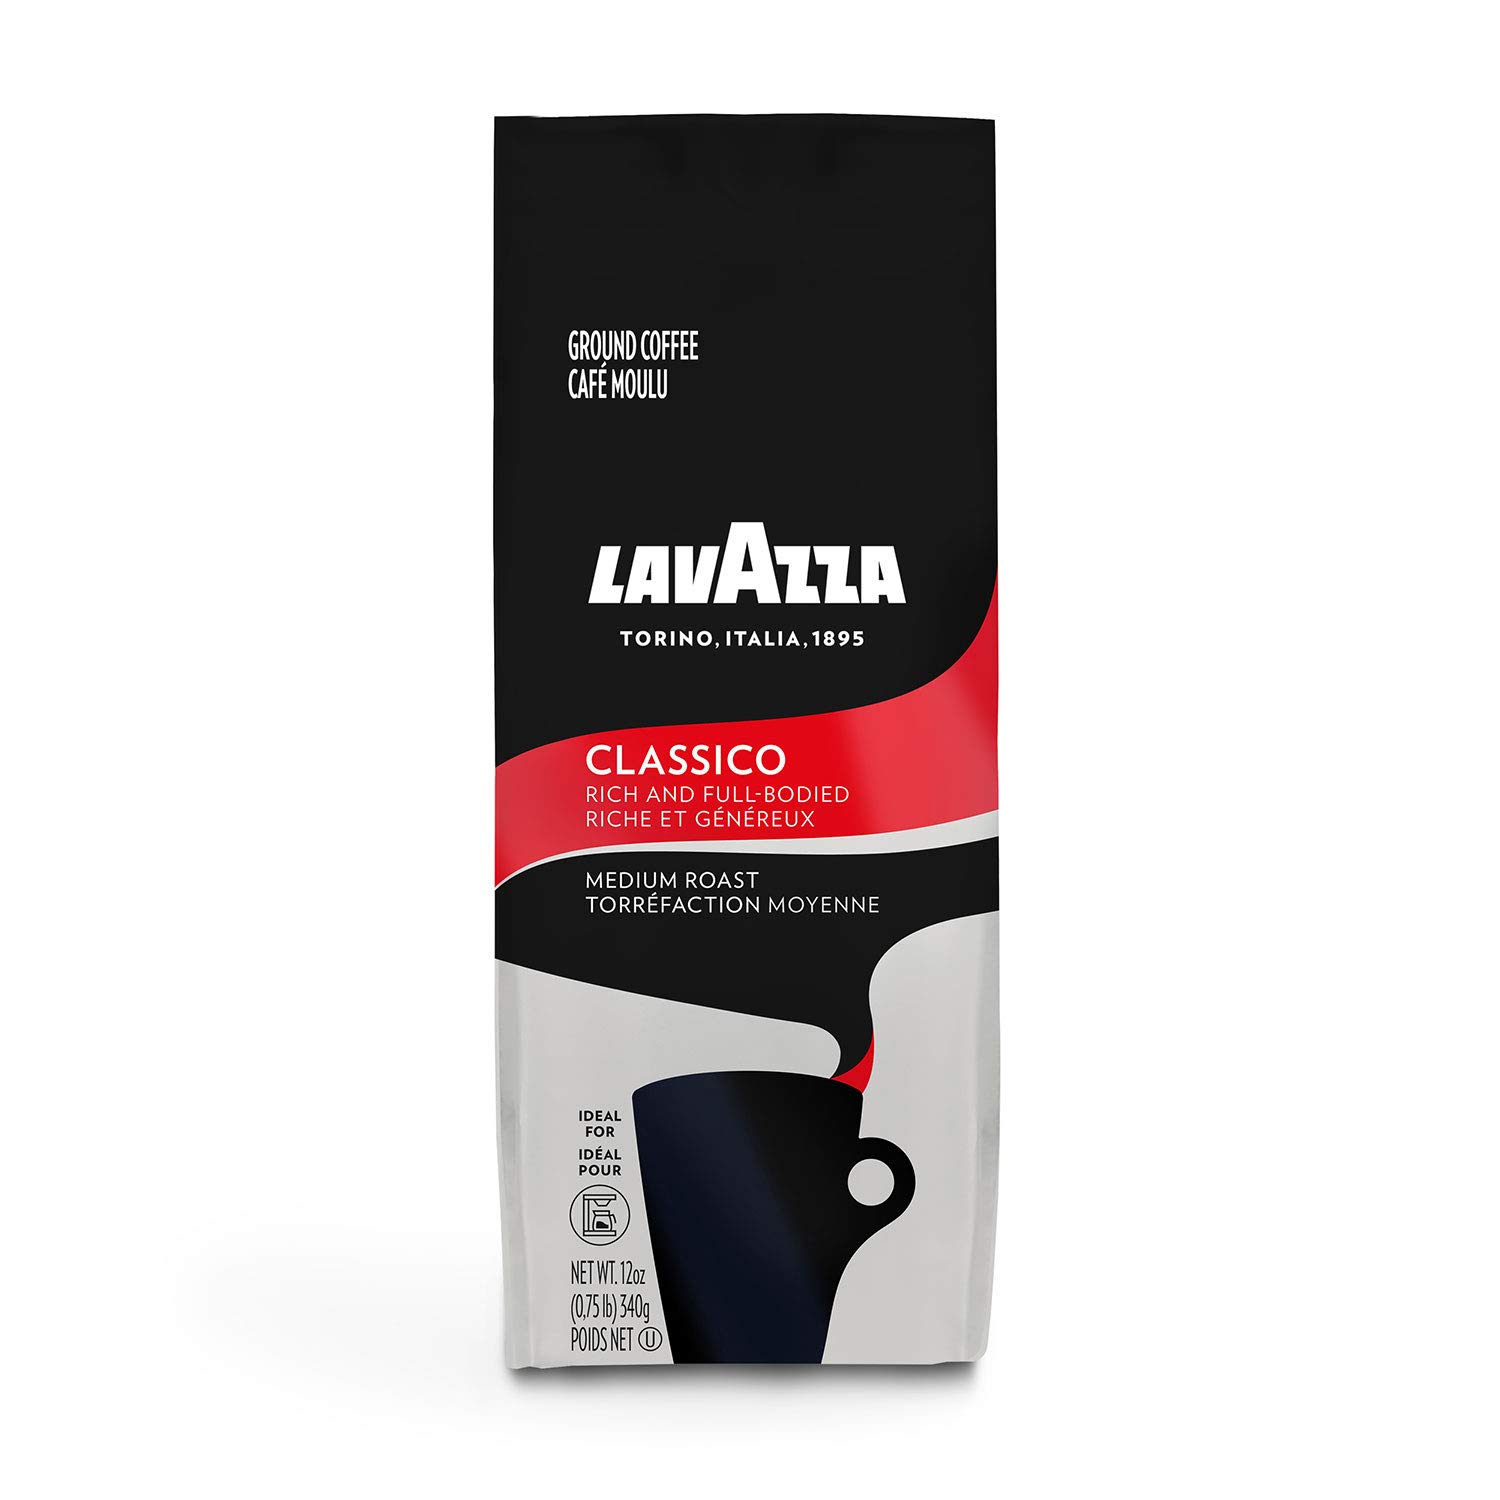 I've been drinking Lavazza Classico Ground Coffee for a while now, and it' become my go-to for my morning routine. It' a medium roast, so it' not too strong or too light, just right for me. The flavor is rich and it smells amazing when brewing.The Good Stuff:Taste: This coffee has a rich, full-bodied taste that' not too overpowering. It' smooth and doesn't leave a bitter aftertaste.Smell: The aroma when you're brewing it is just awesome. It fills the kitchen and it' a great way to start th